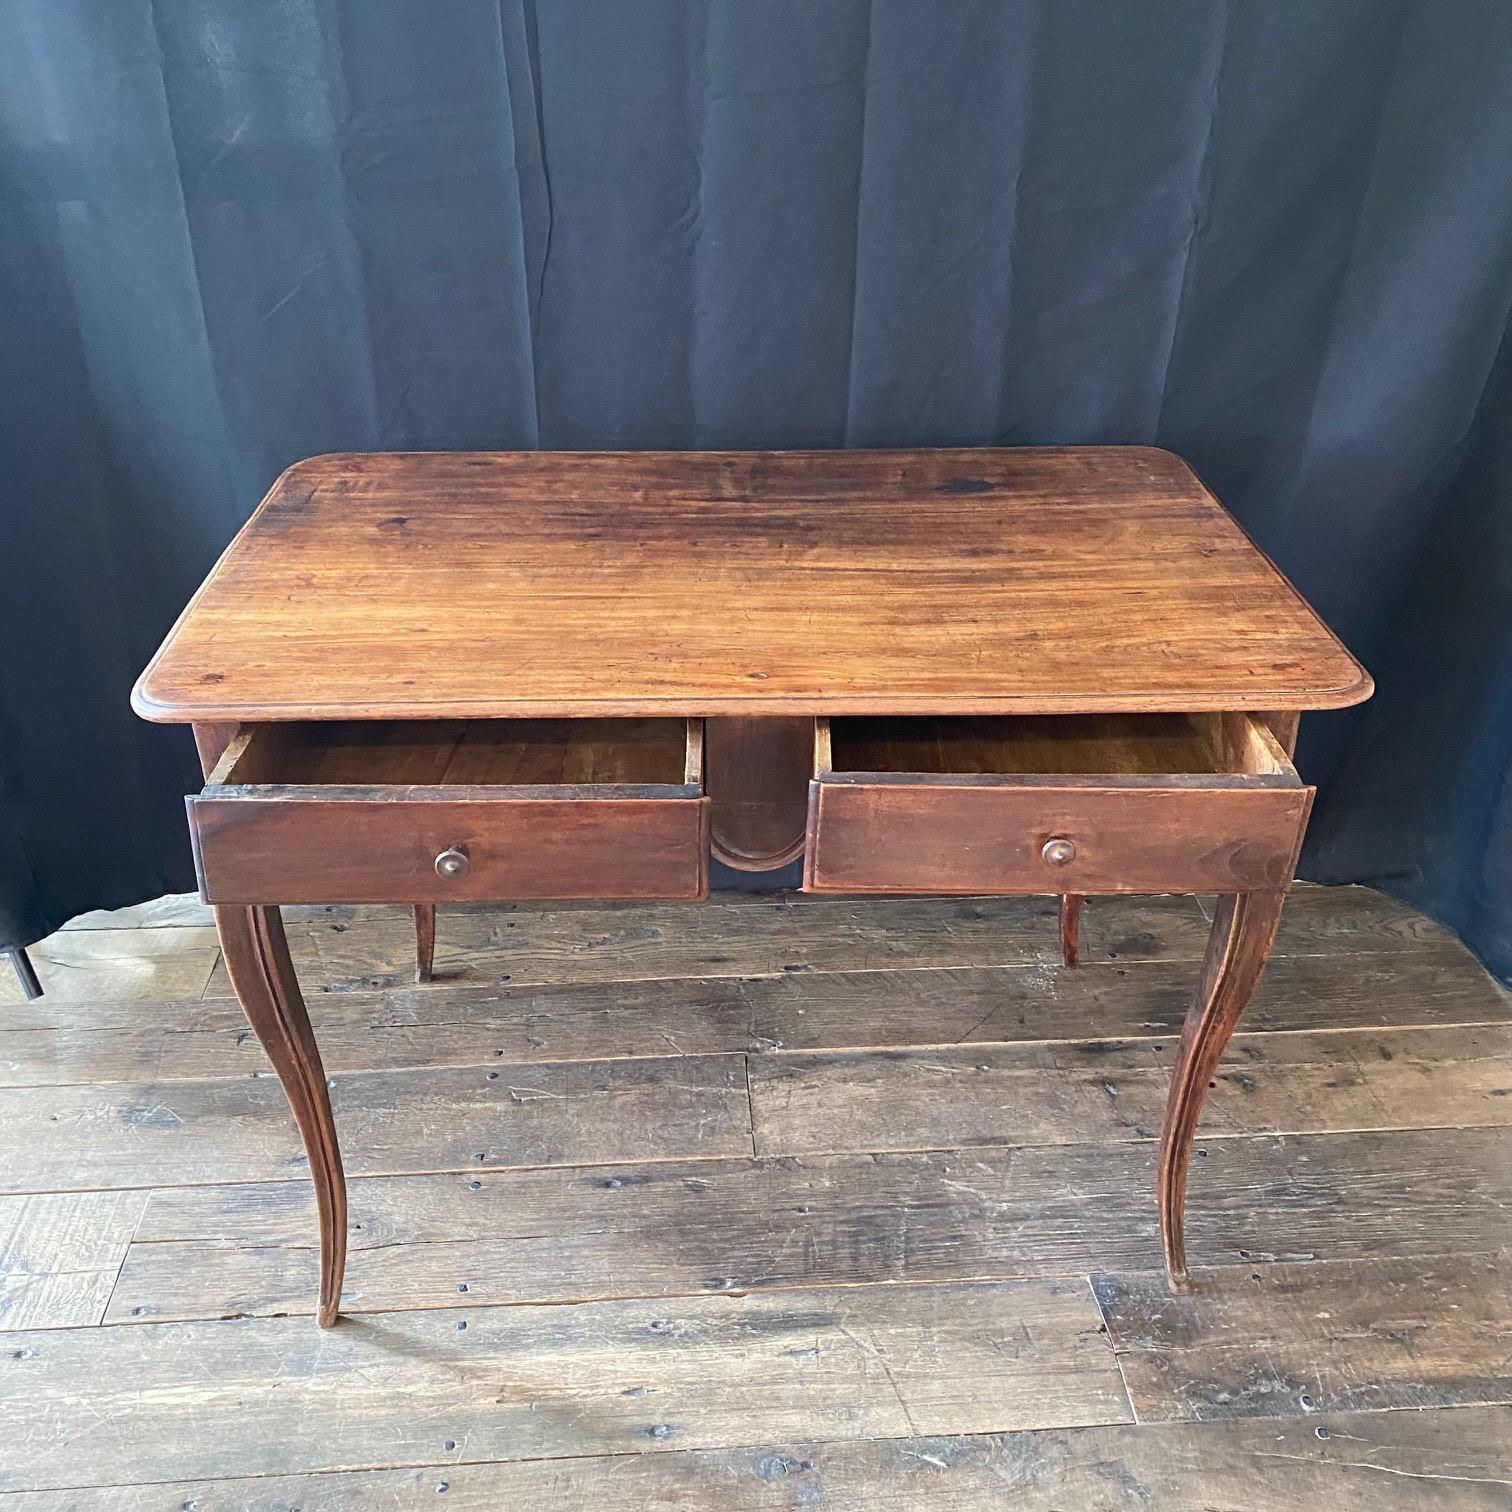 Lovely antique French side table or desk from the late 19th century; a beautiful example of the French Country design aesthetic. The table or desk has a beautiful carved scalloped apron on all four sides making it ideal to sit in the center of a